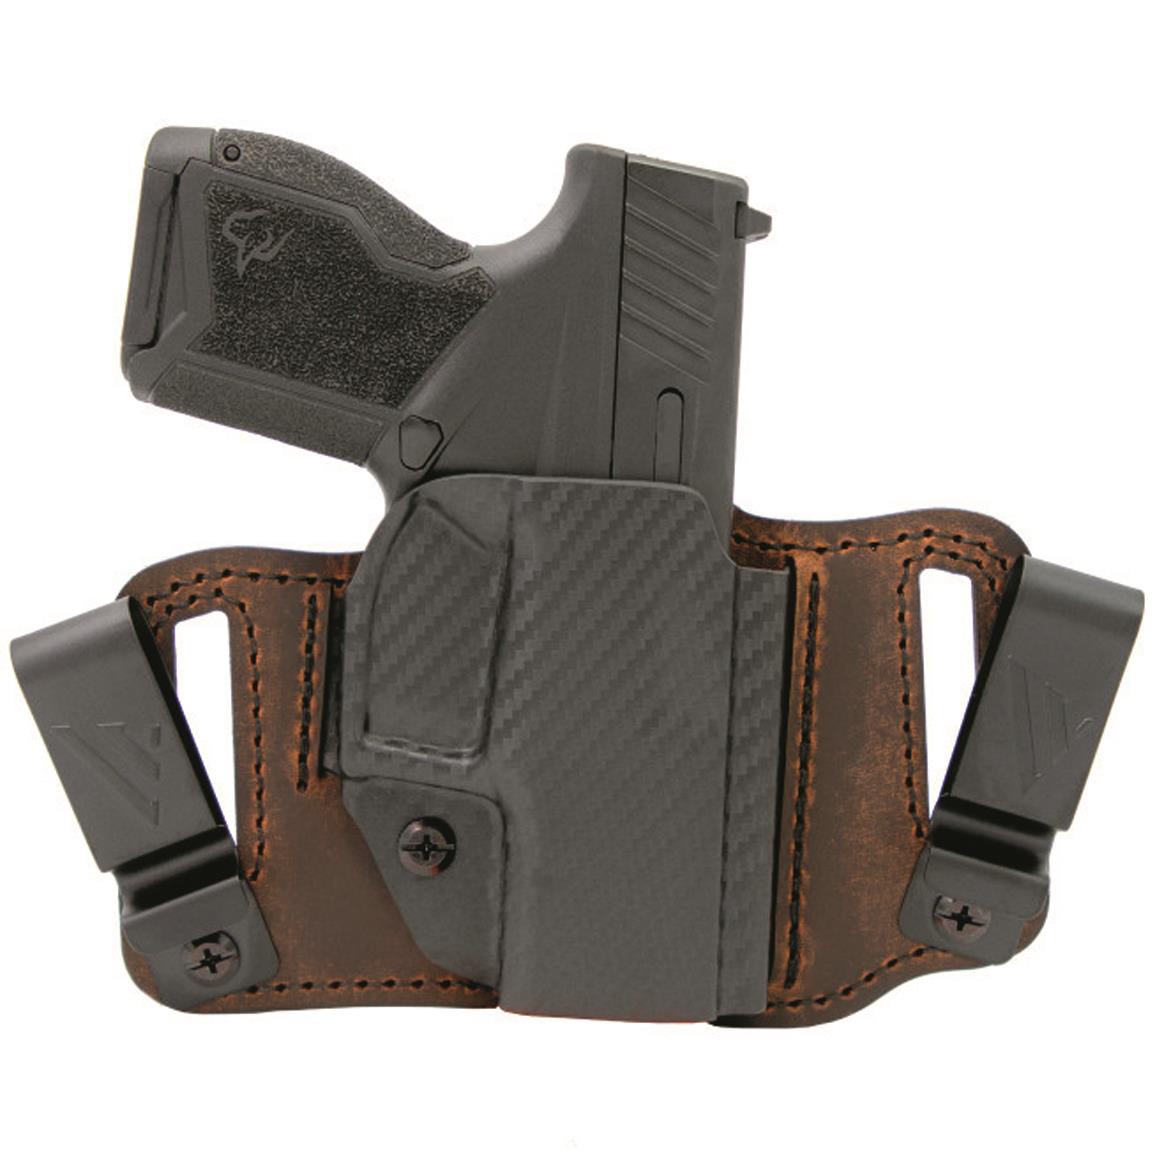 VersaCarry Insurgent Deluxe IWB/OWB Holster, Right Hand Draw, Smith & Wesson M&P Shield